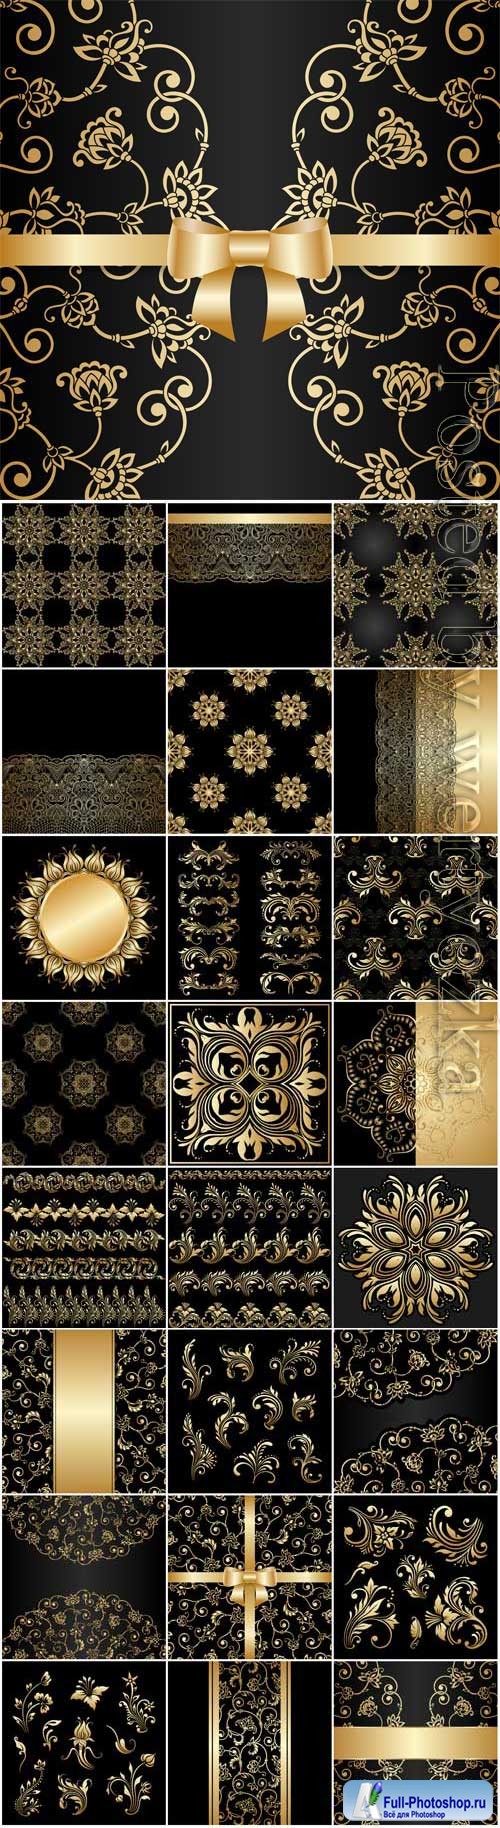 Gold decorative elements and patterns in vector